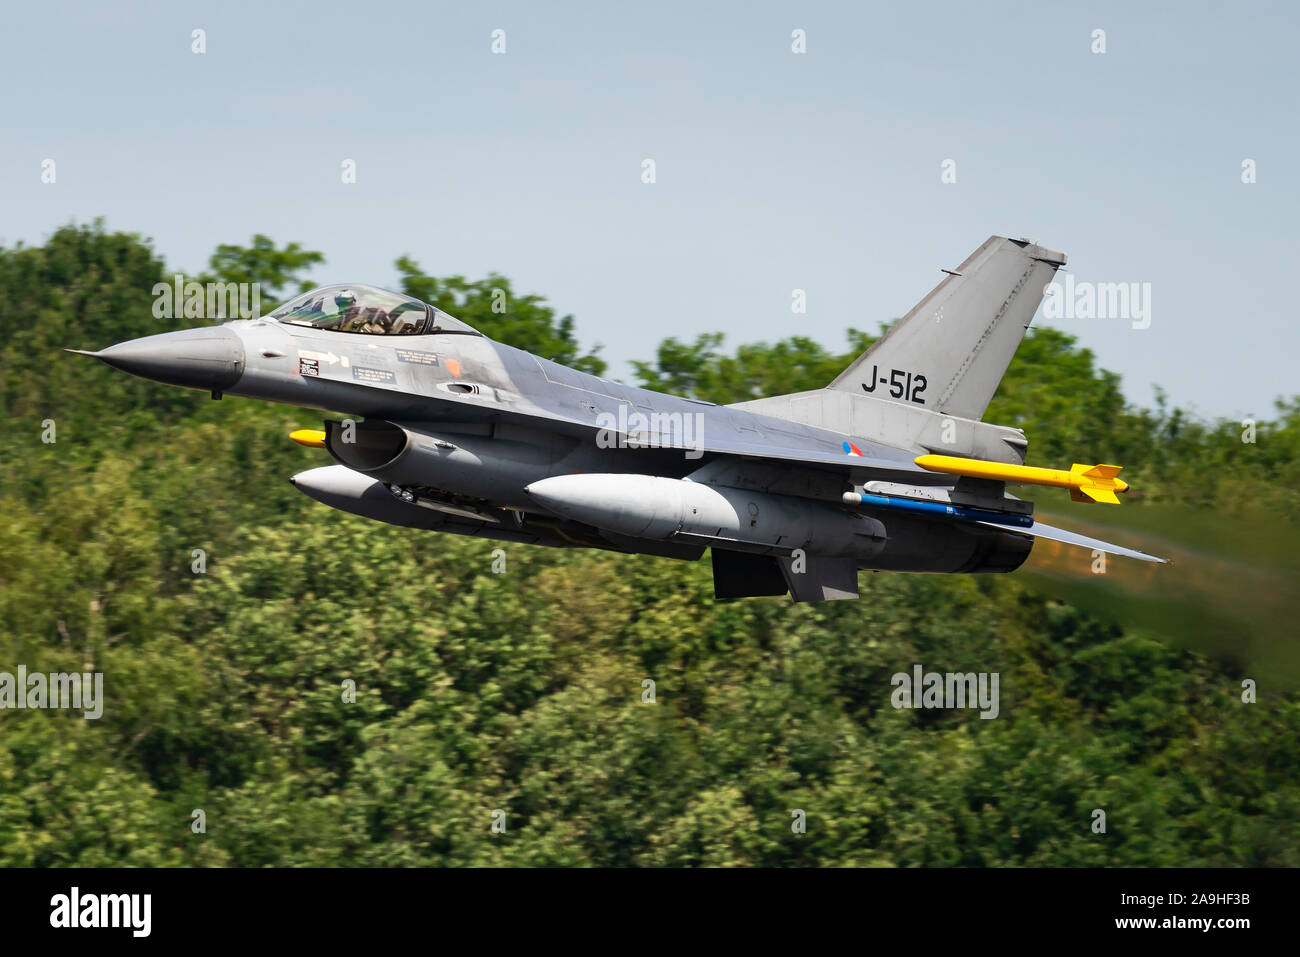 A General Dynamics F-16 Fighting Falcon single-engine supersonic multirole fighter aircraft of the Royal Netherlands Air Force at the Volkel airbase. Stock Photo